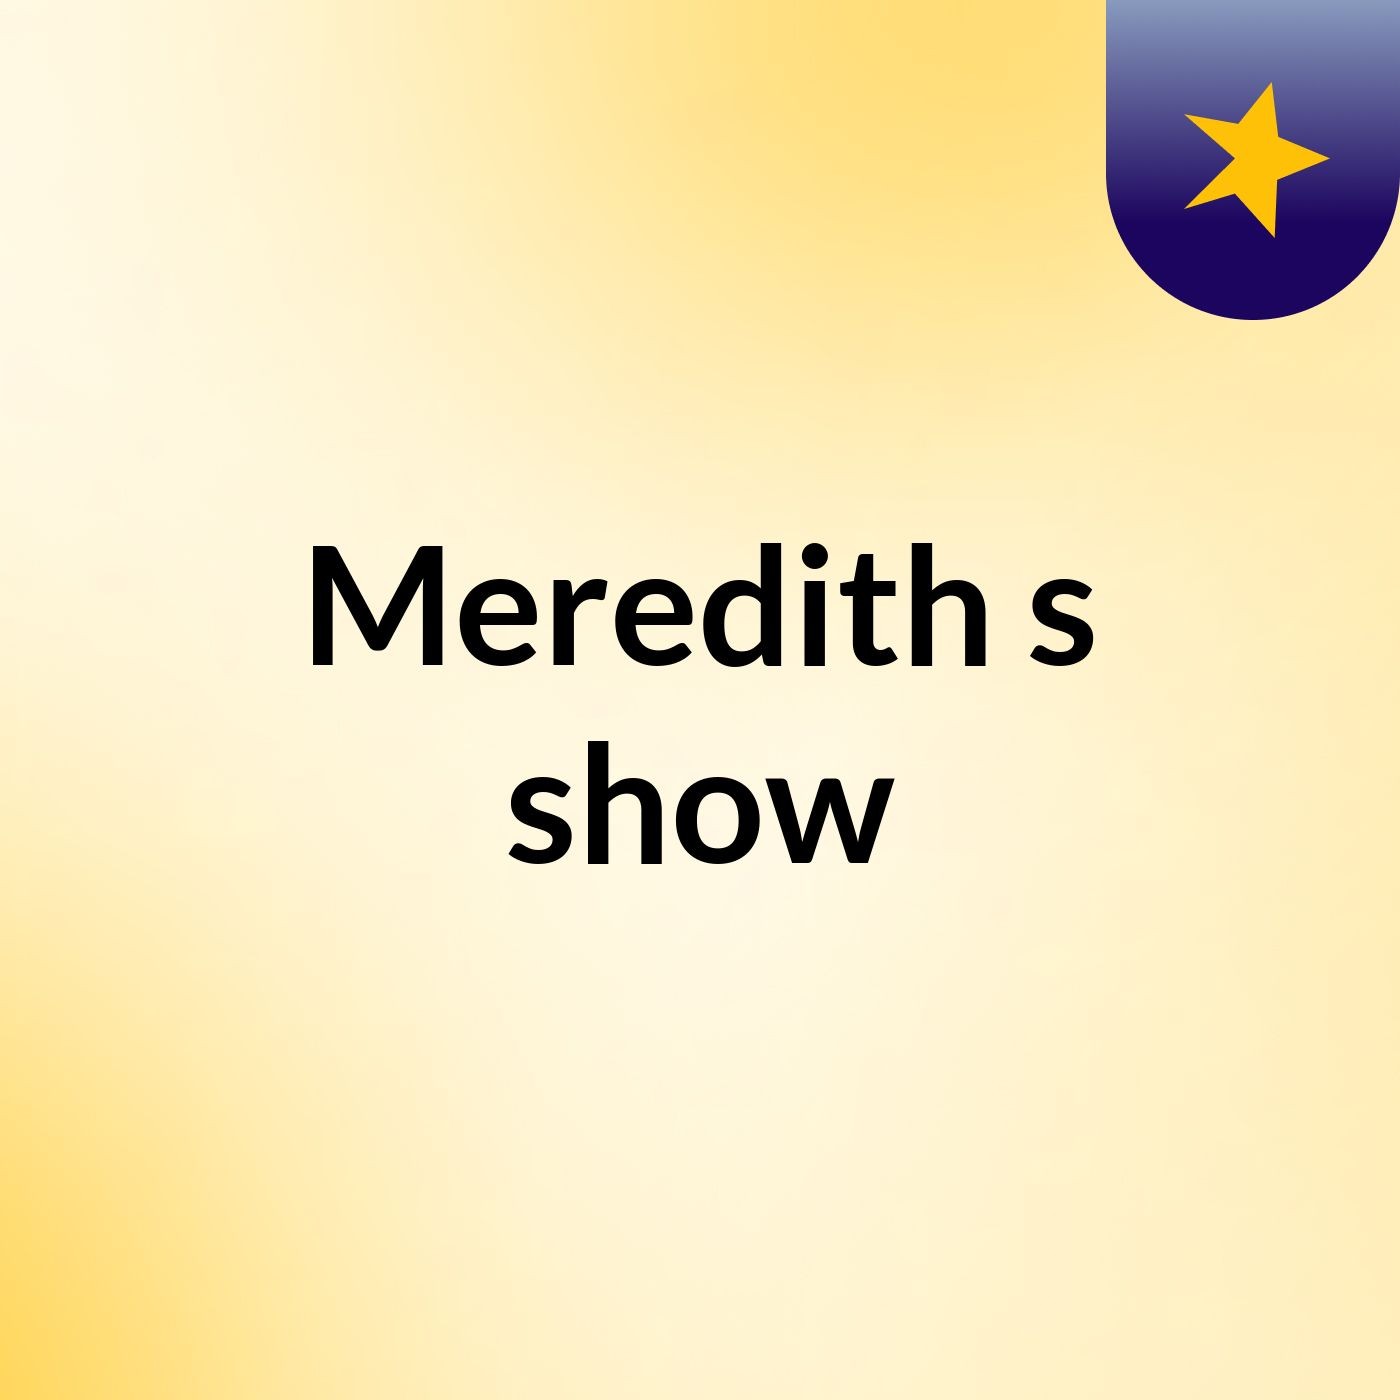 Meredith's show